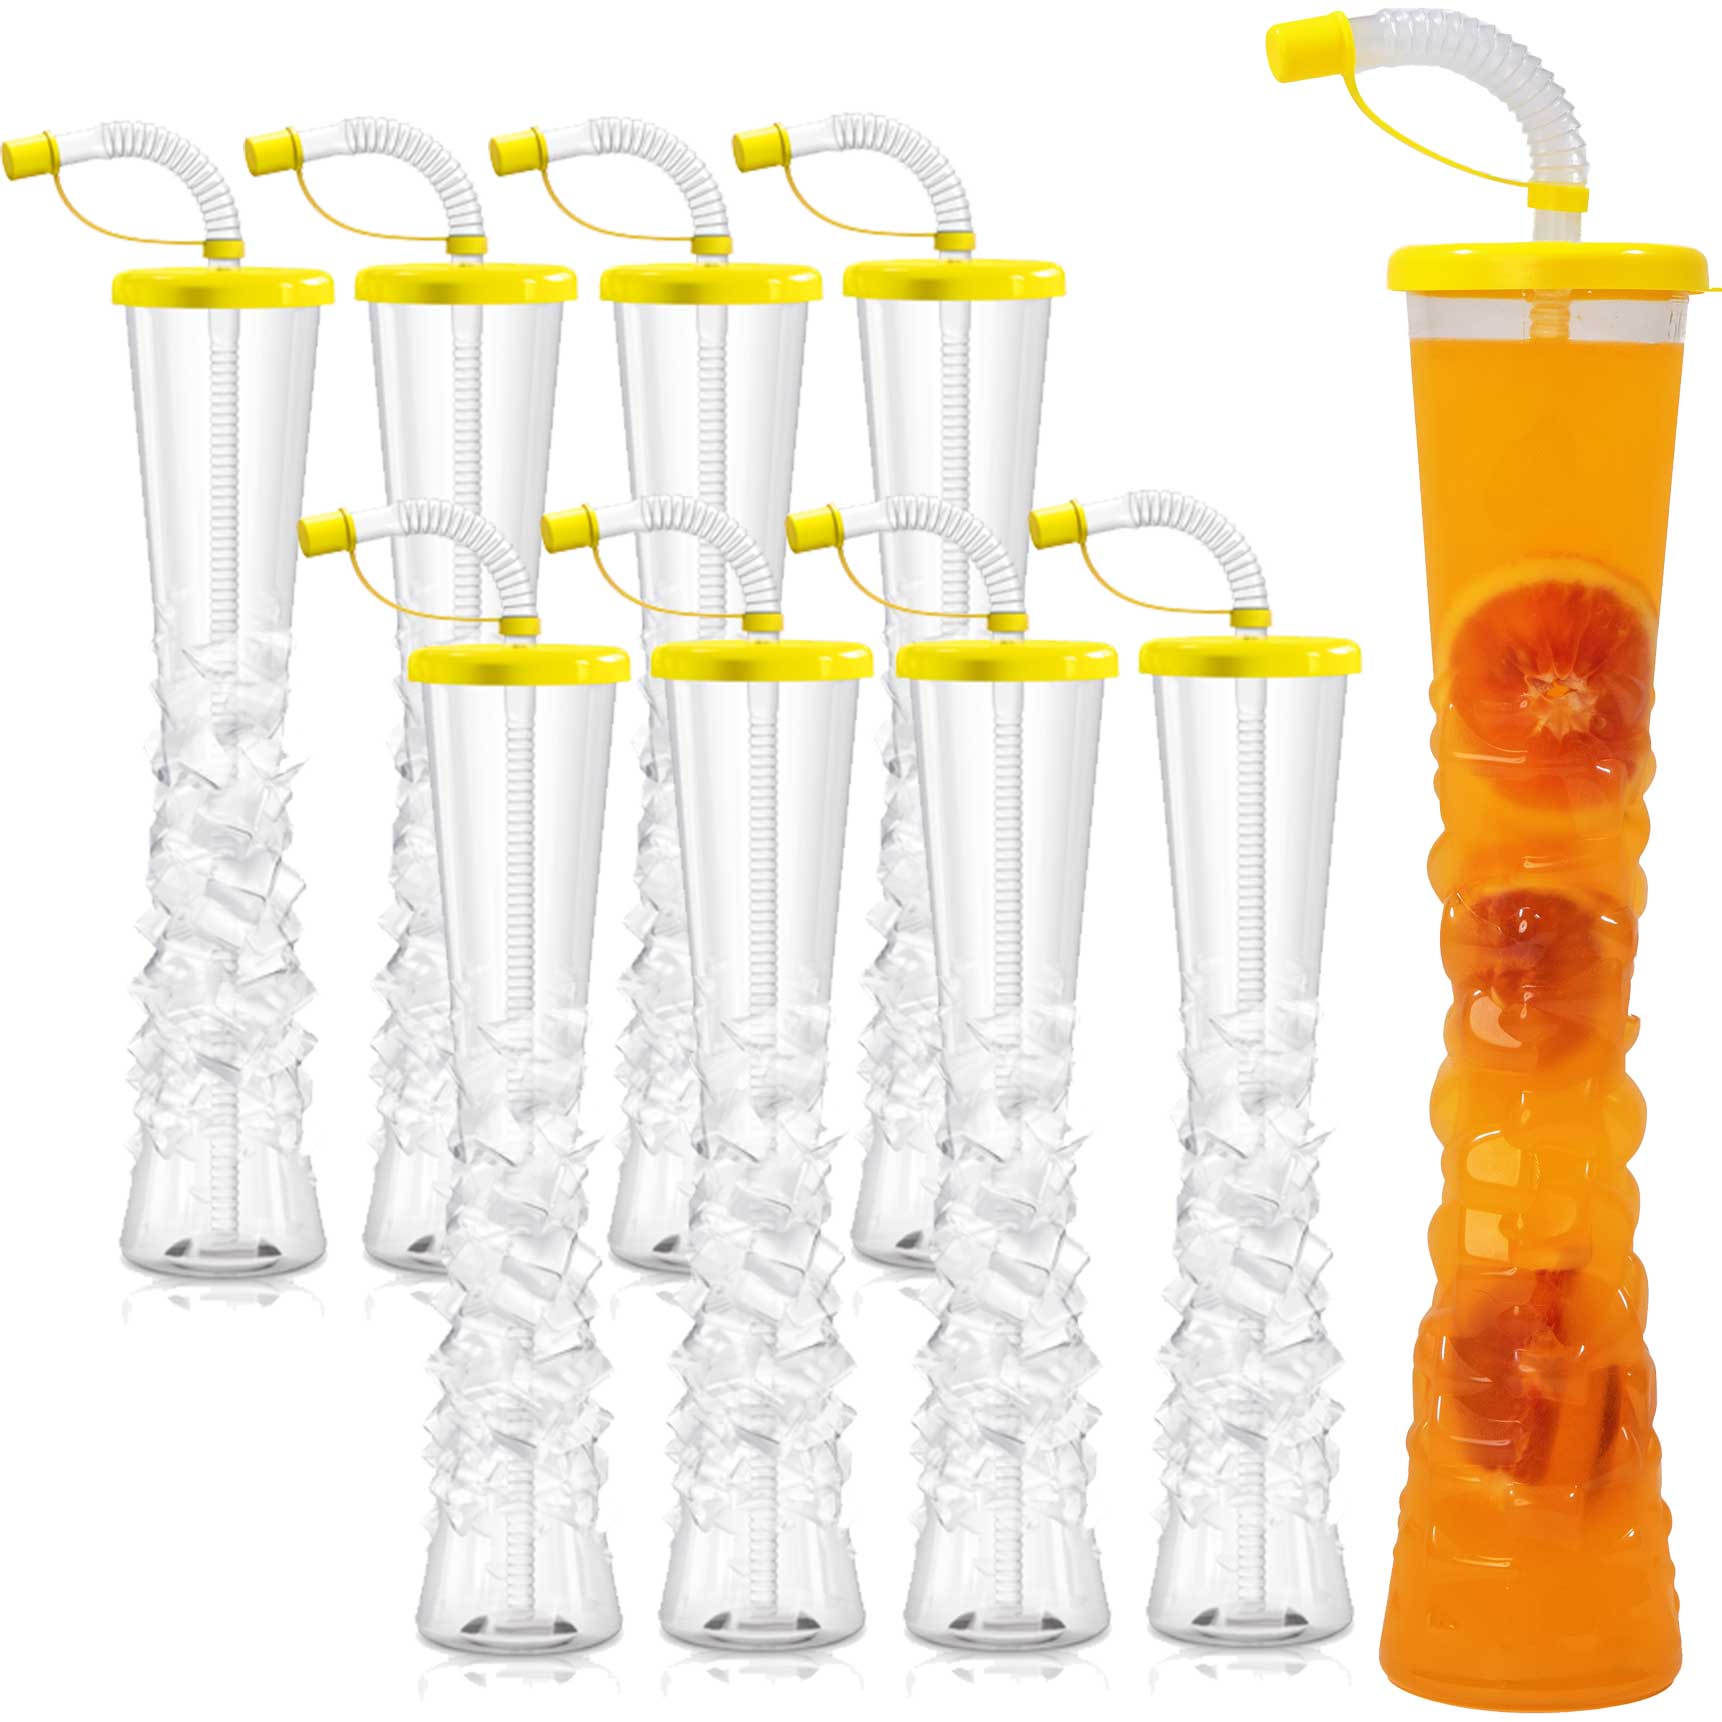 http://noveltycupsusa.com/cdn/shop/files/sweet-world-usa-yard-cups-ice-yard-cups-54-cups-yellow-for-margaritas-and-frozen-drinks-kids-parties-17oz-500ml-sw-57355-cups-with-lids-and-straws-35524505239711.jpg?v=1684776207